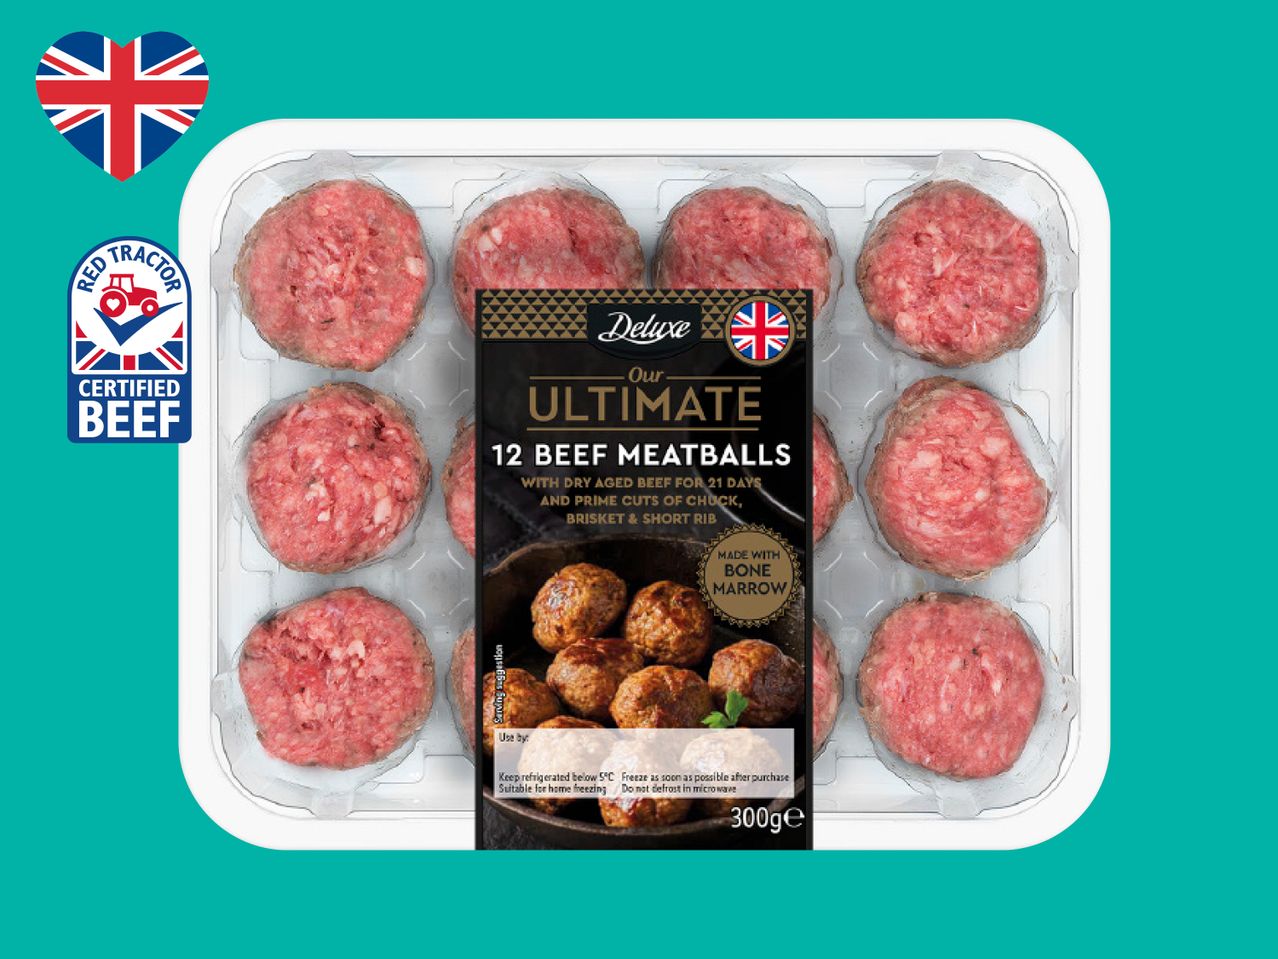 Go to full screen view: Deluxe 12 Ultimate British Beef Meatballs - Image 1